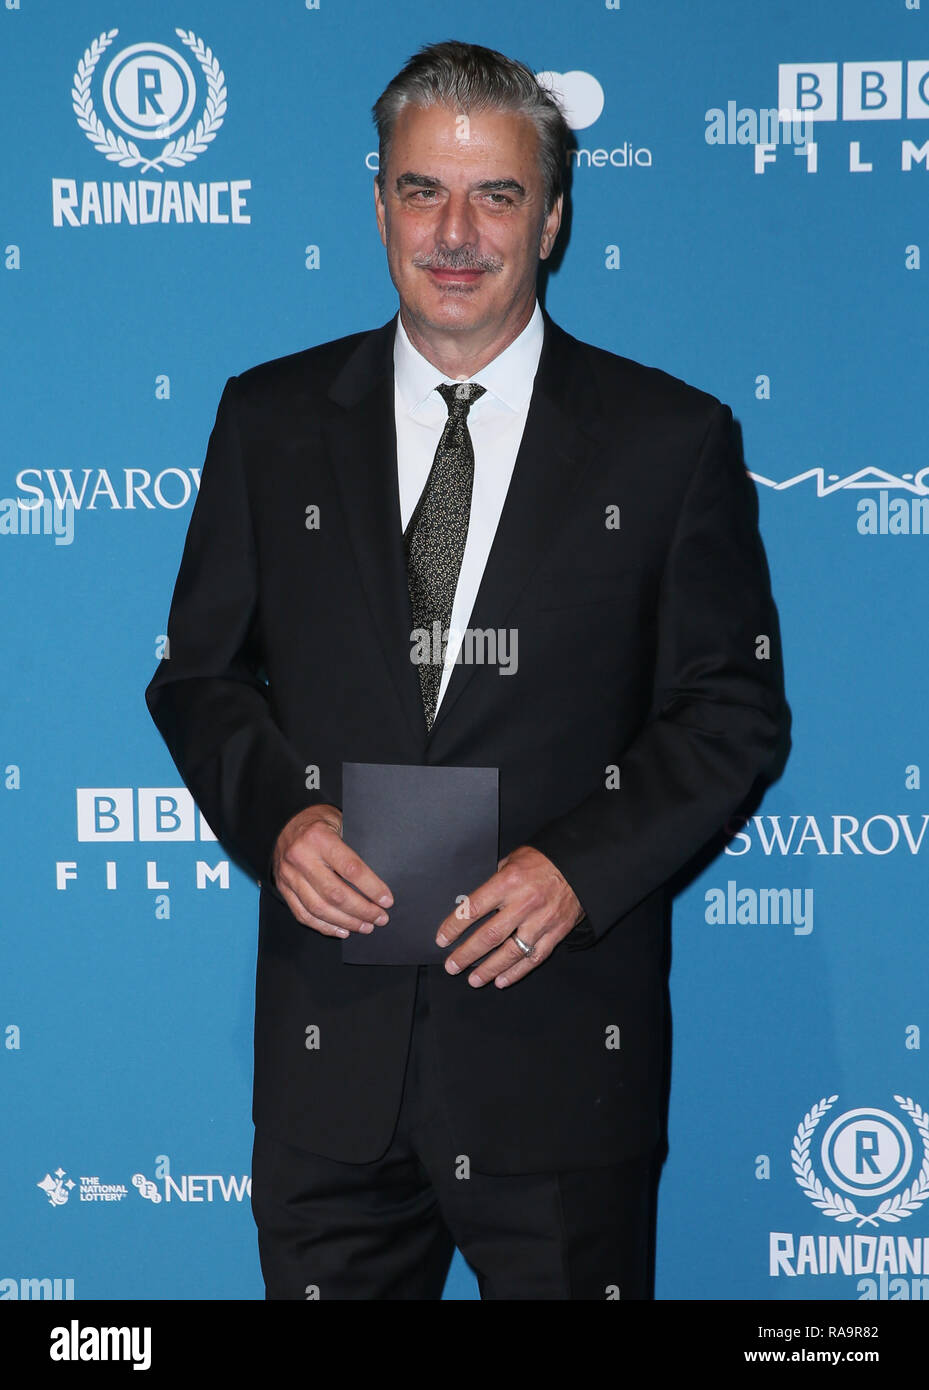 The British Independent Film Awards 2018 held at Old Billingsgate - Arrivals  Featuring: Chris Noth Where: London, United Kingdom When: 02 Dec 2018 Credit: Mario Mitsis/WENN.com Stock Photo